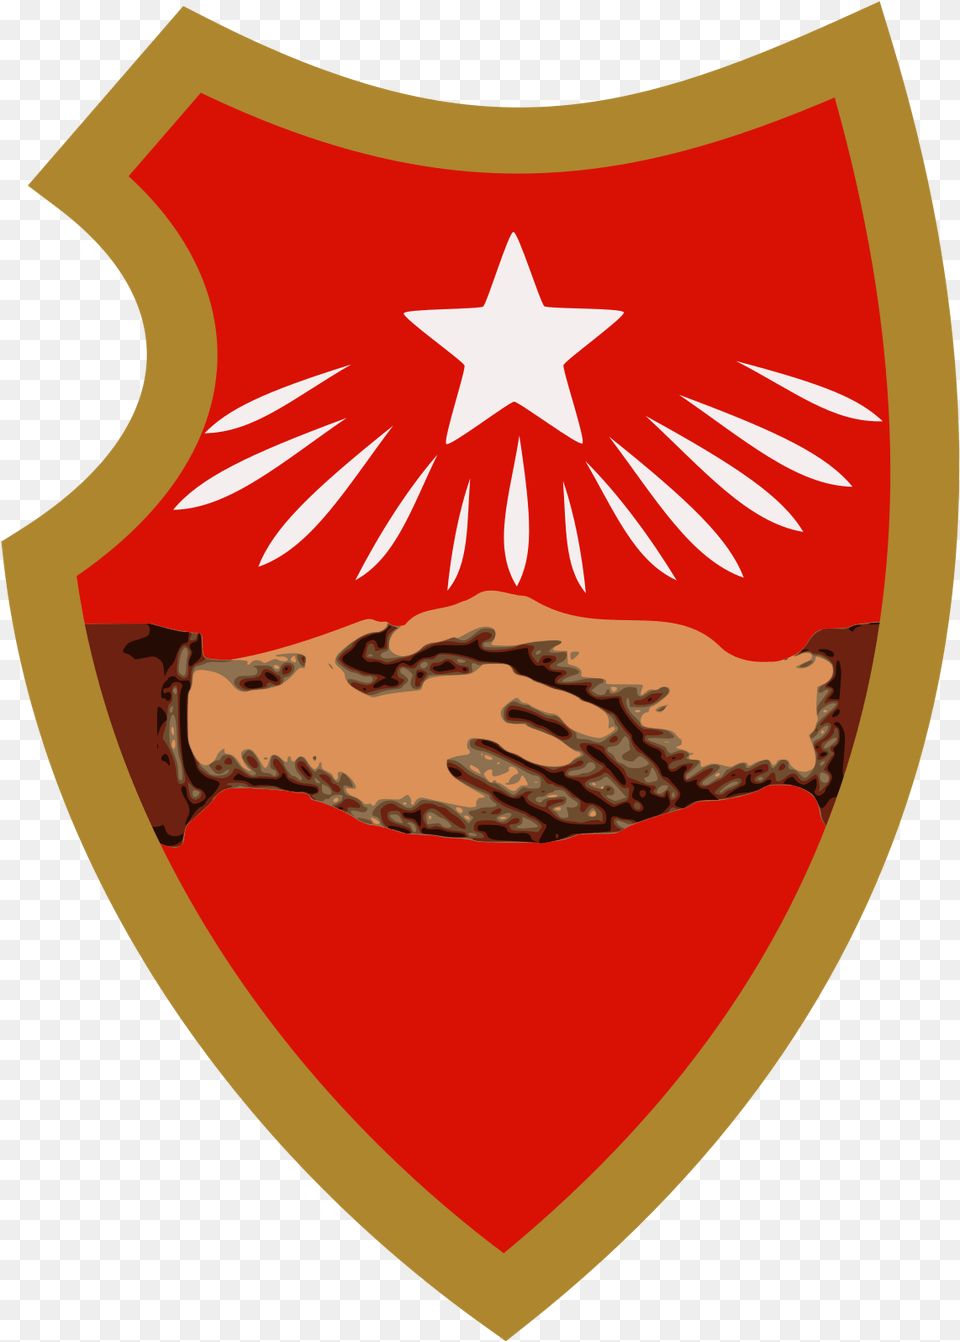 Social Democratic Party Of Germany Symbol, Armor, Shield Free Transparent Png